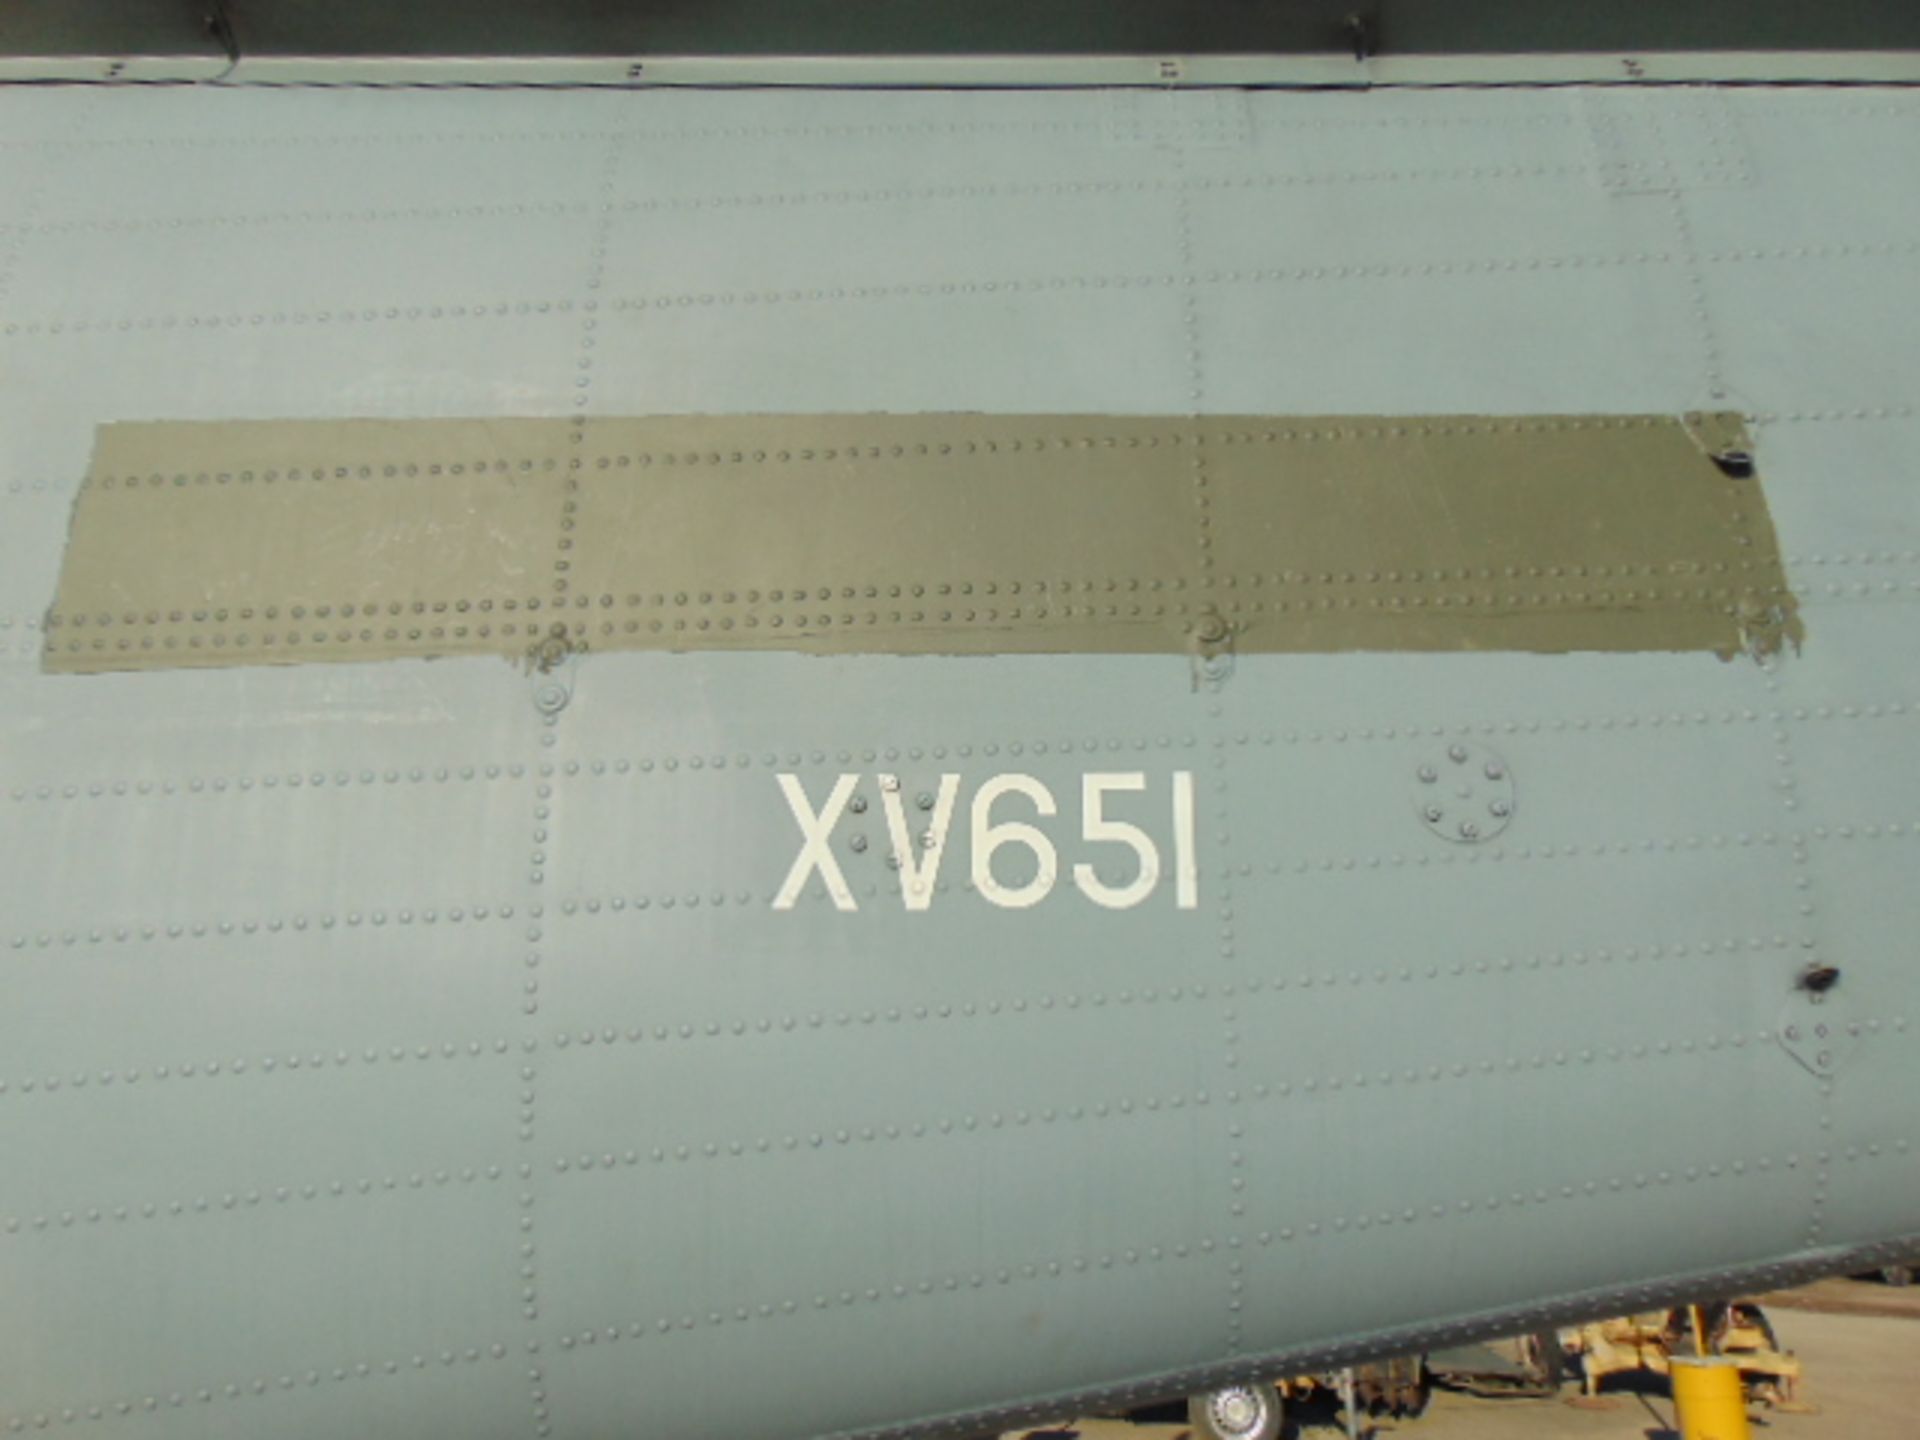 Westland Sea King HAS.5 (TAIL NUMBER XV651) Airframe - Image 9 of 34